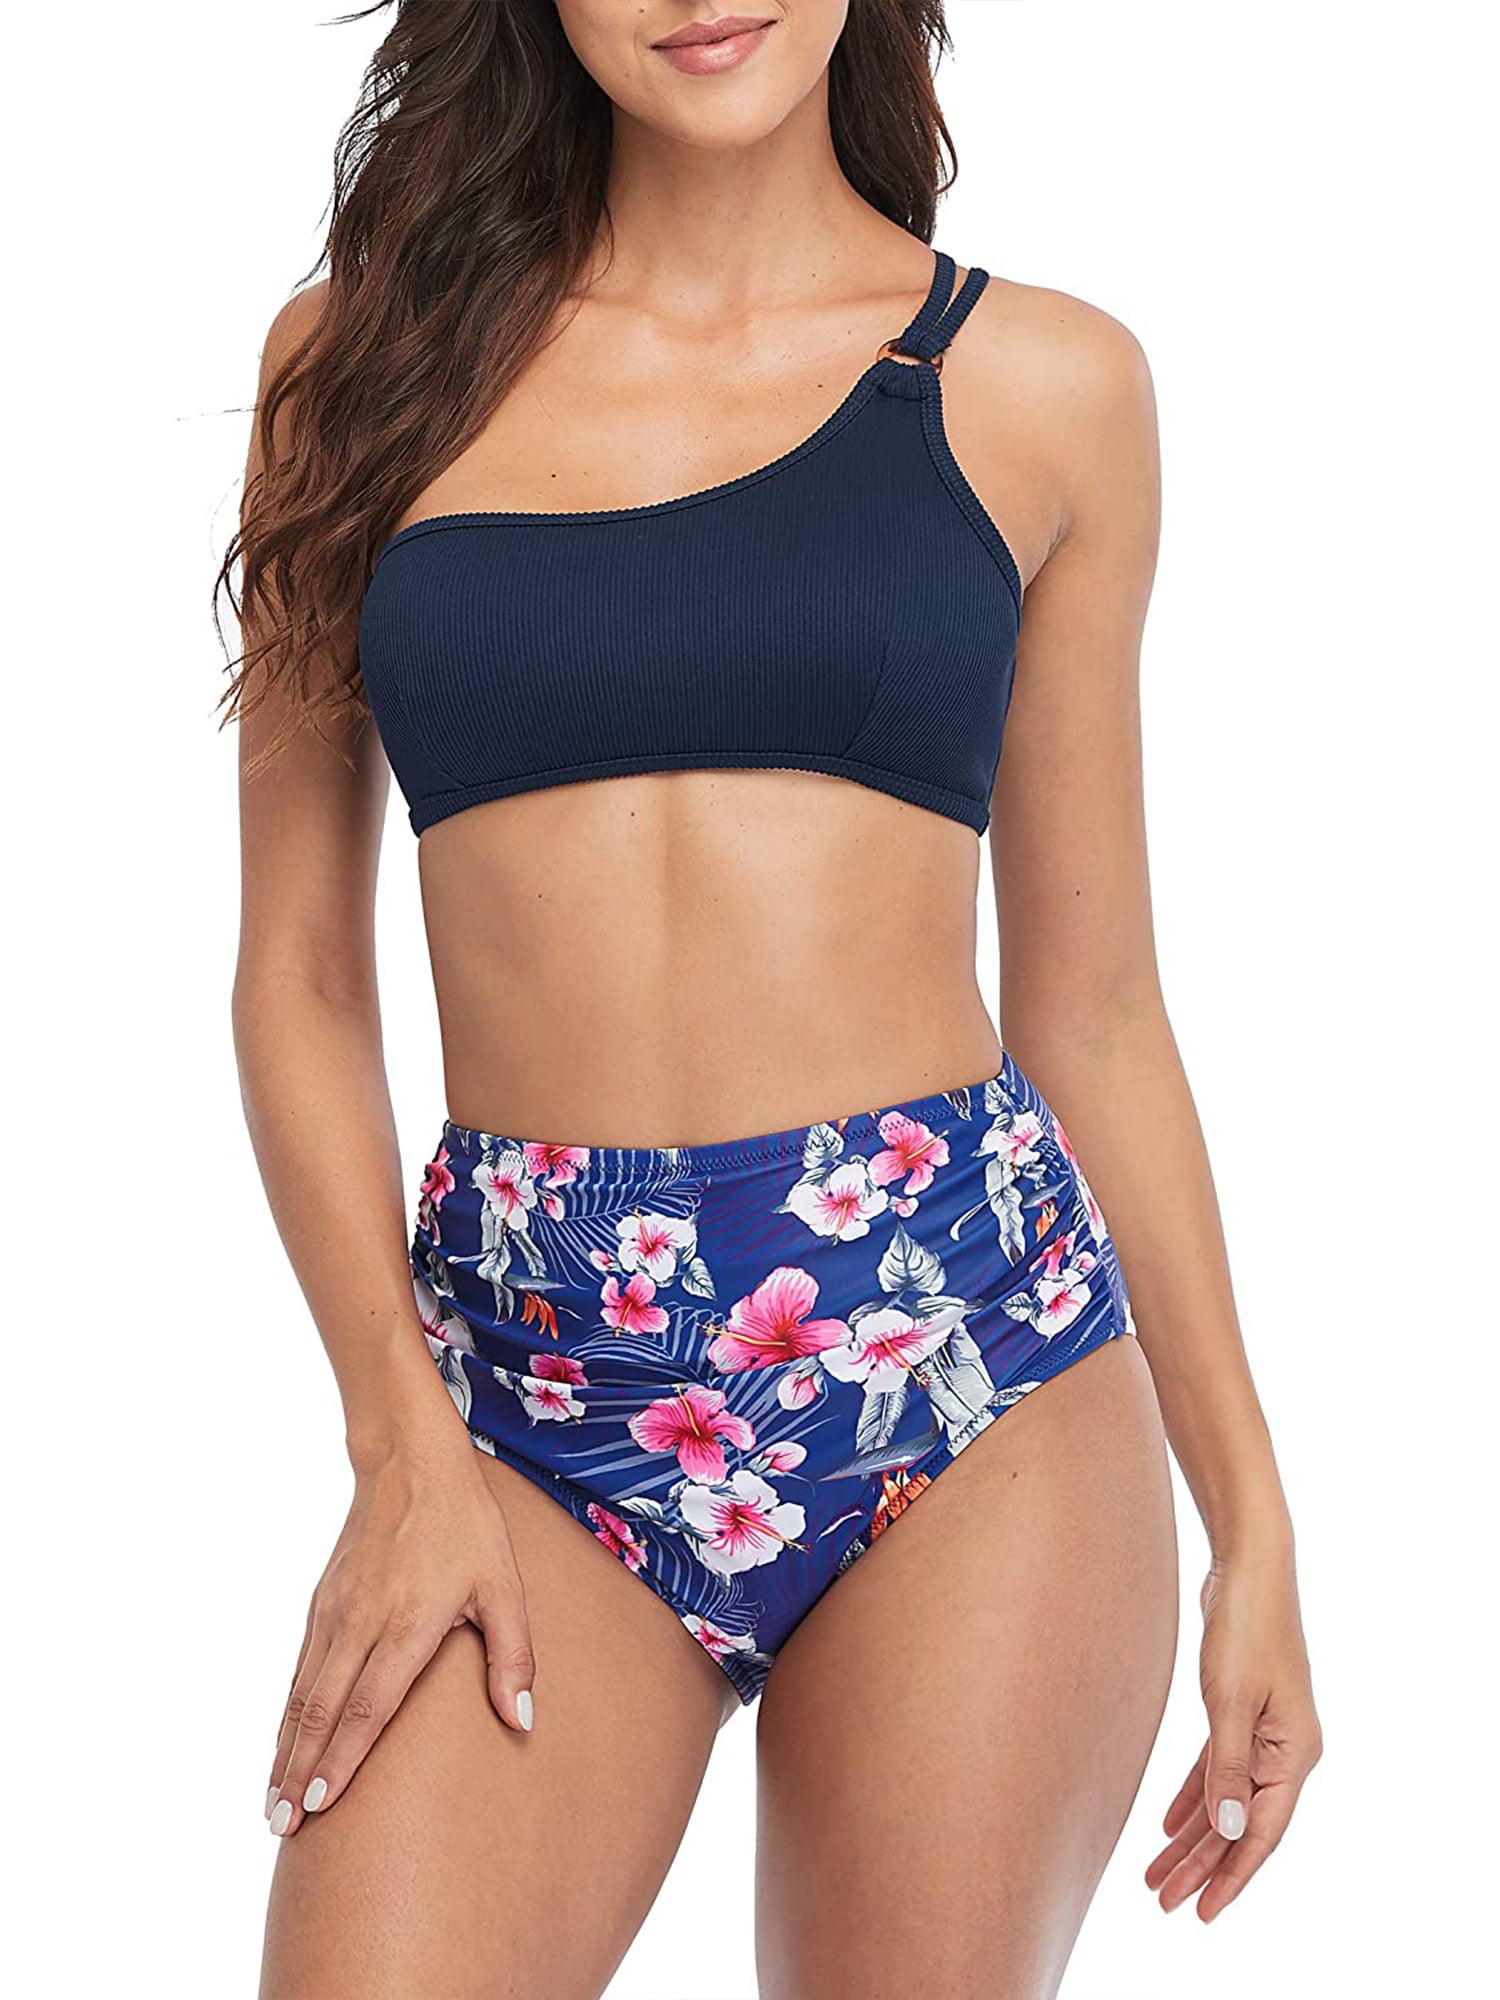 Navy & Pink Floral High Waisted Bikini Set with Padded Bra Top